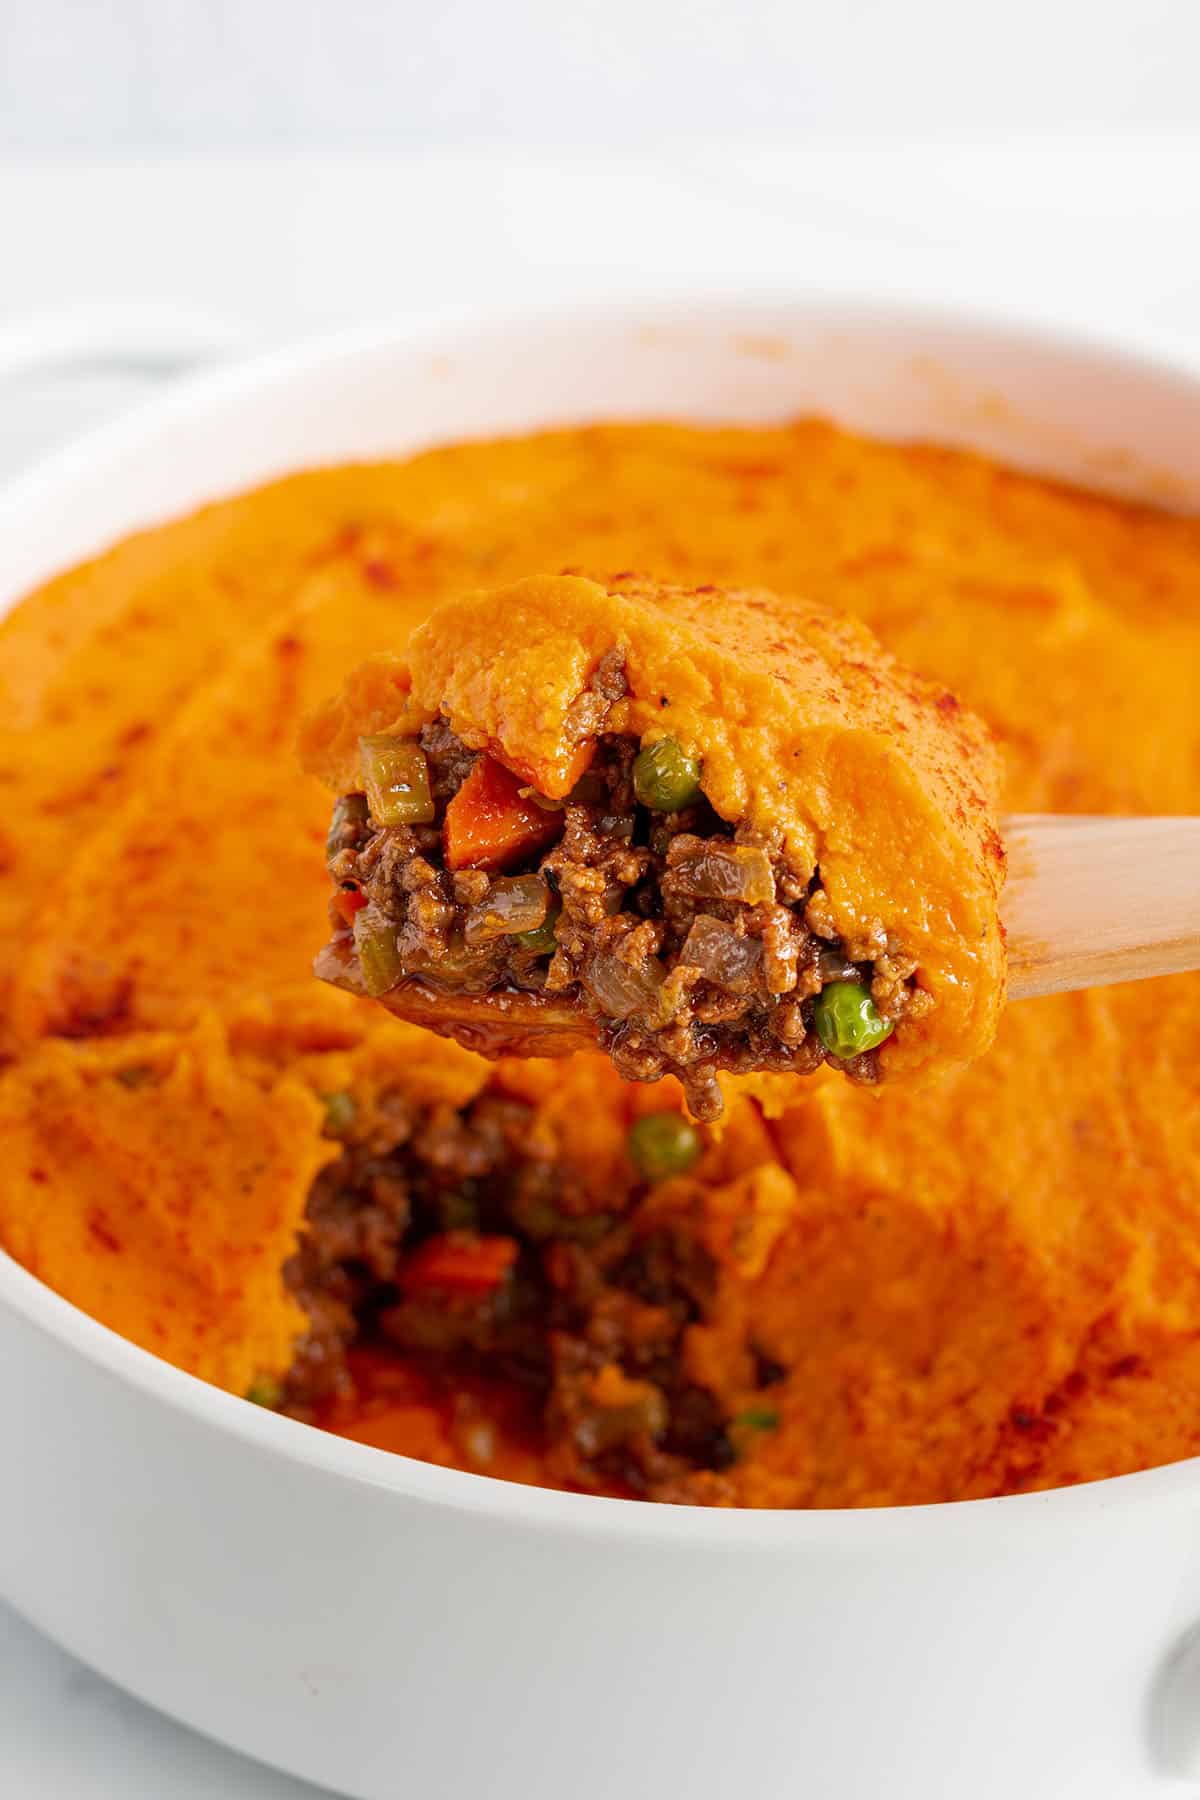 A spatula scooping out a serving of sweet potato Shepherd's Pie.